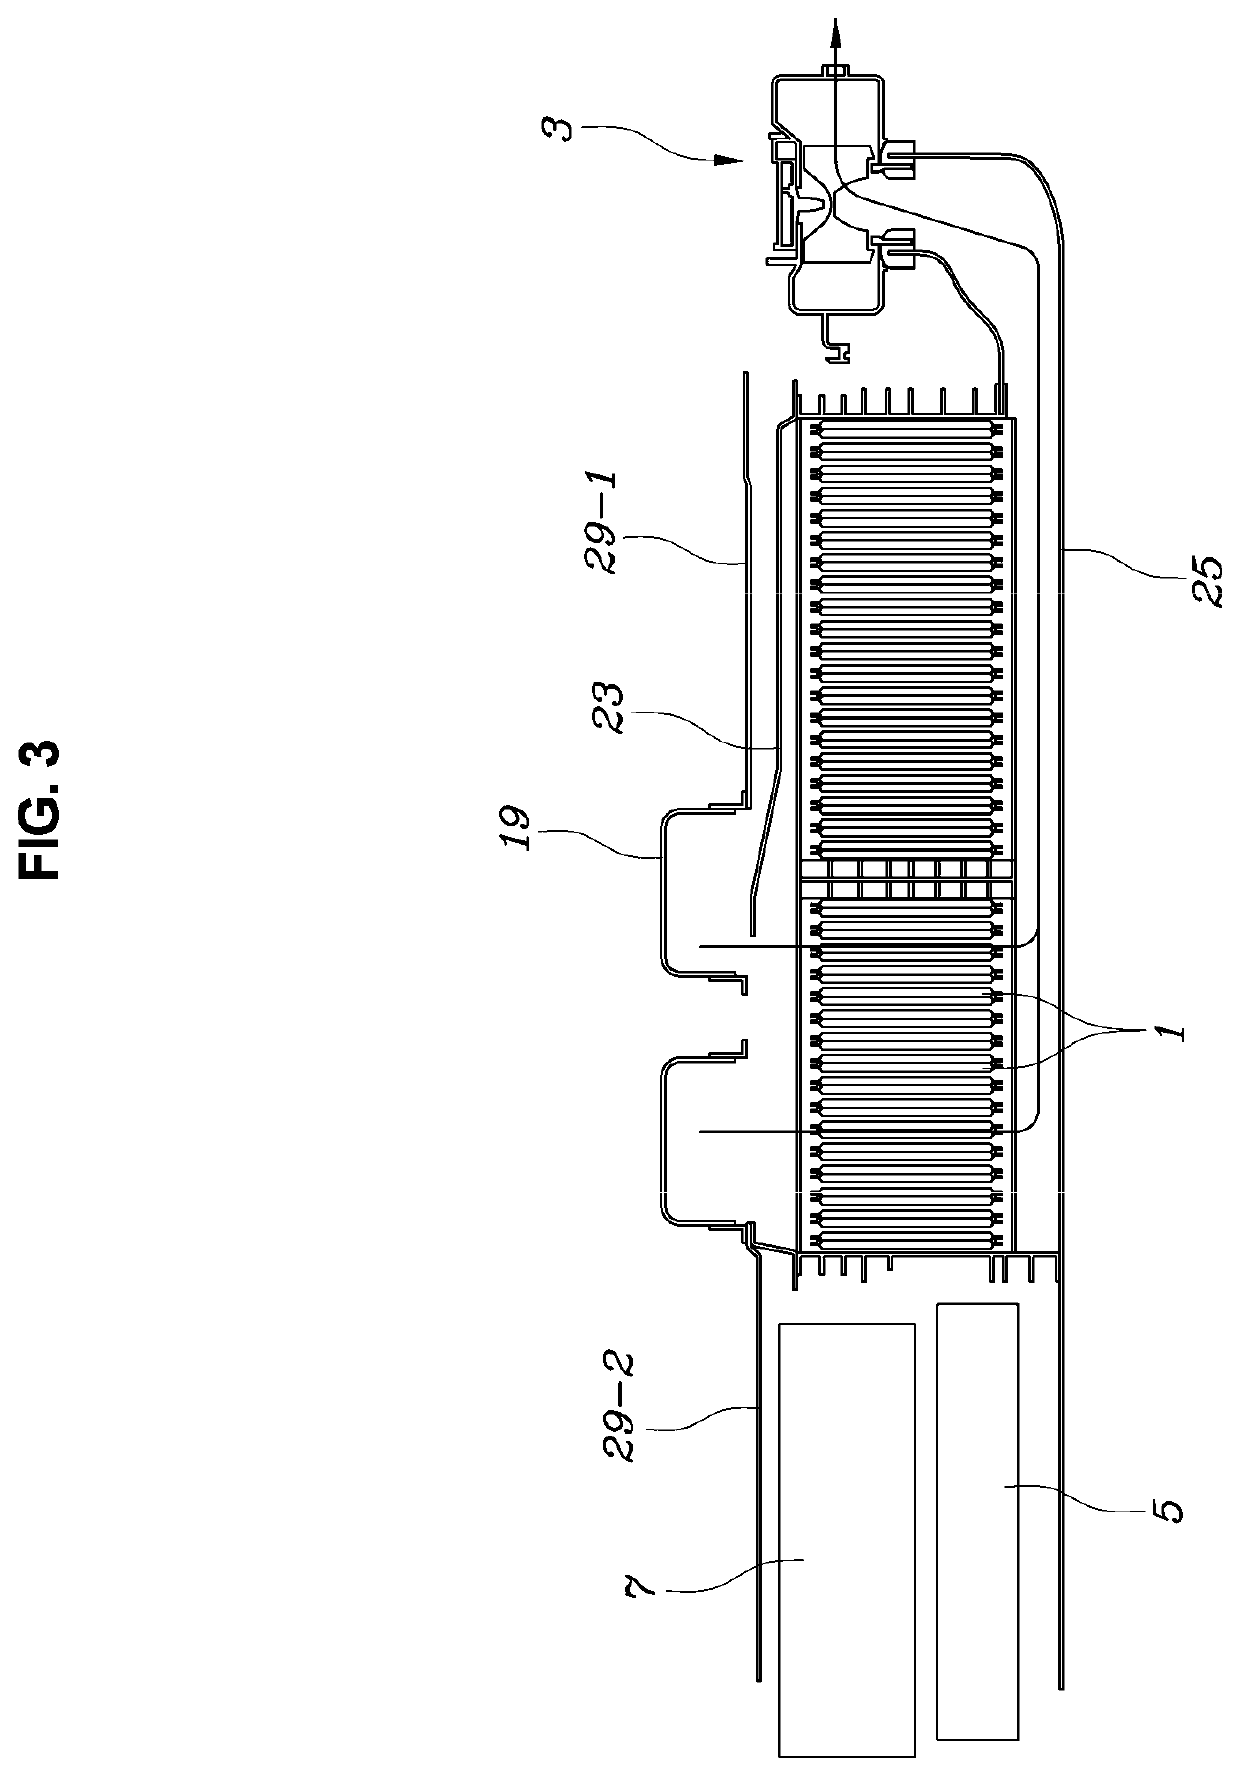 Battery system of vehicle